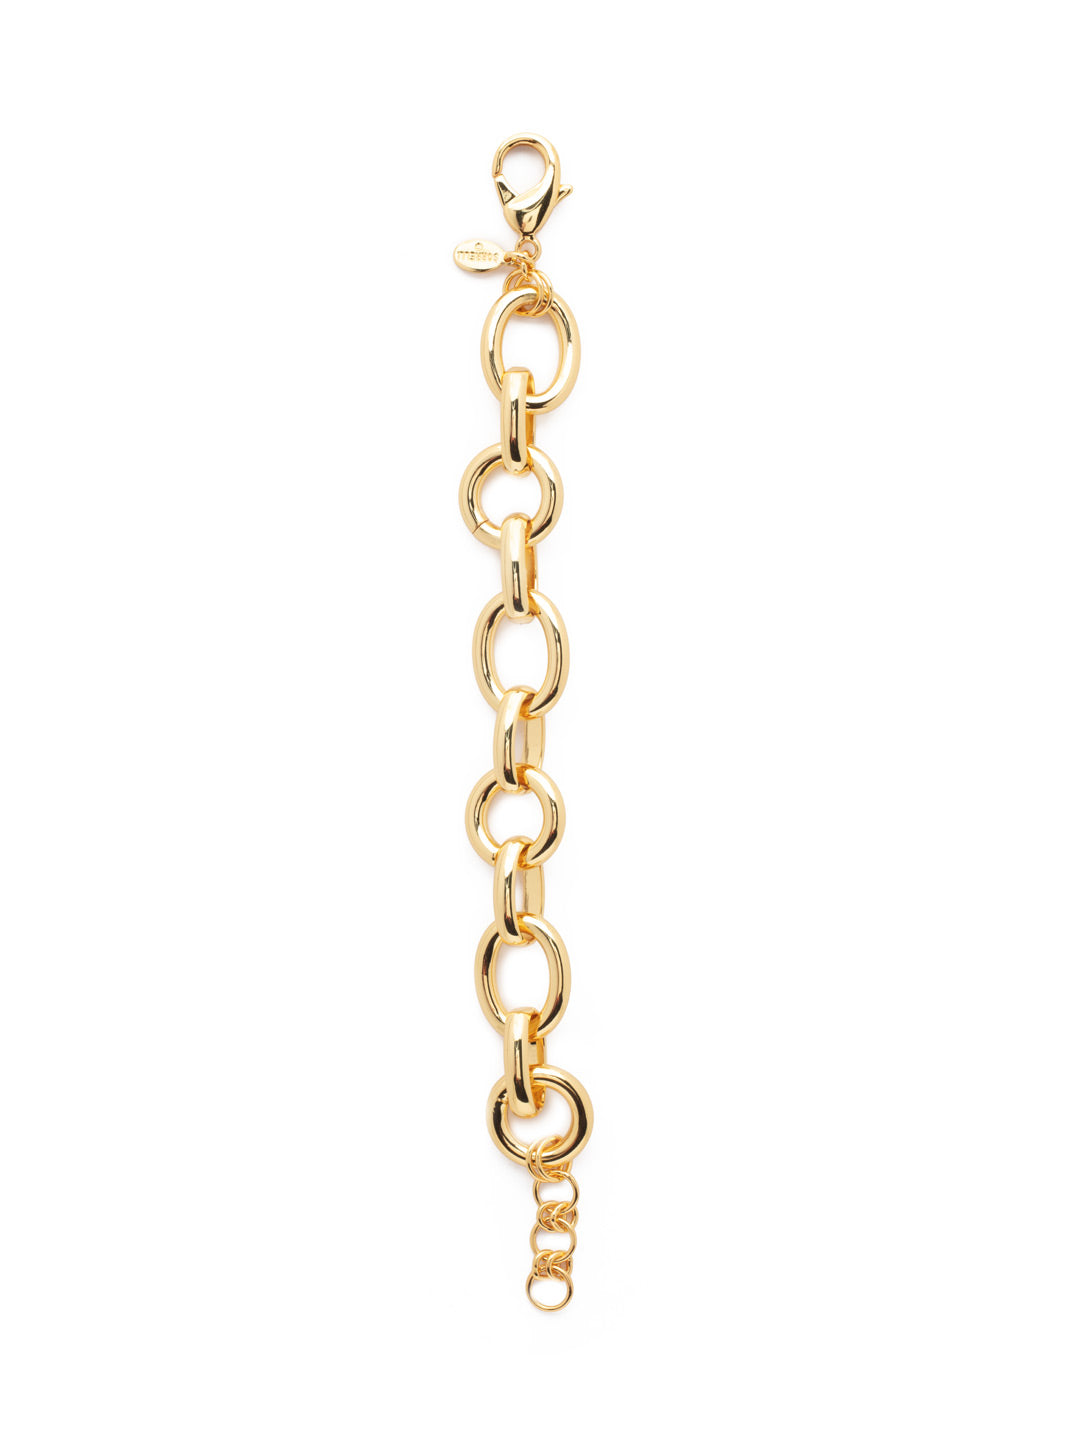 Jeanette Tennis Bracelet - 4BEV4BGMTL - <p>The Jeanette tennis bracelet is a classic wardrobe staple; uniform chains linked together and secured with a clasp. From Sorrelli's Bare Metallic collection in our Bright Gold-tone finish.</p>